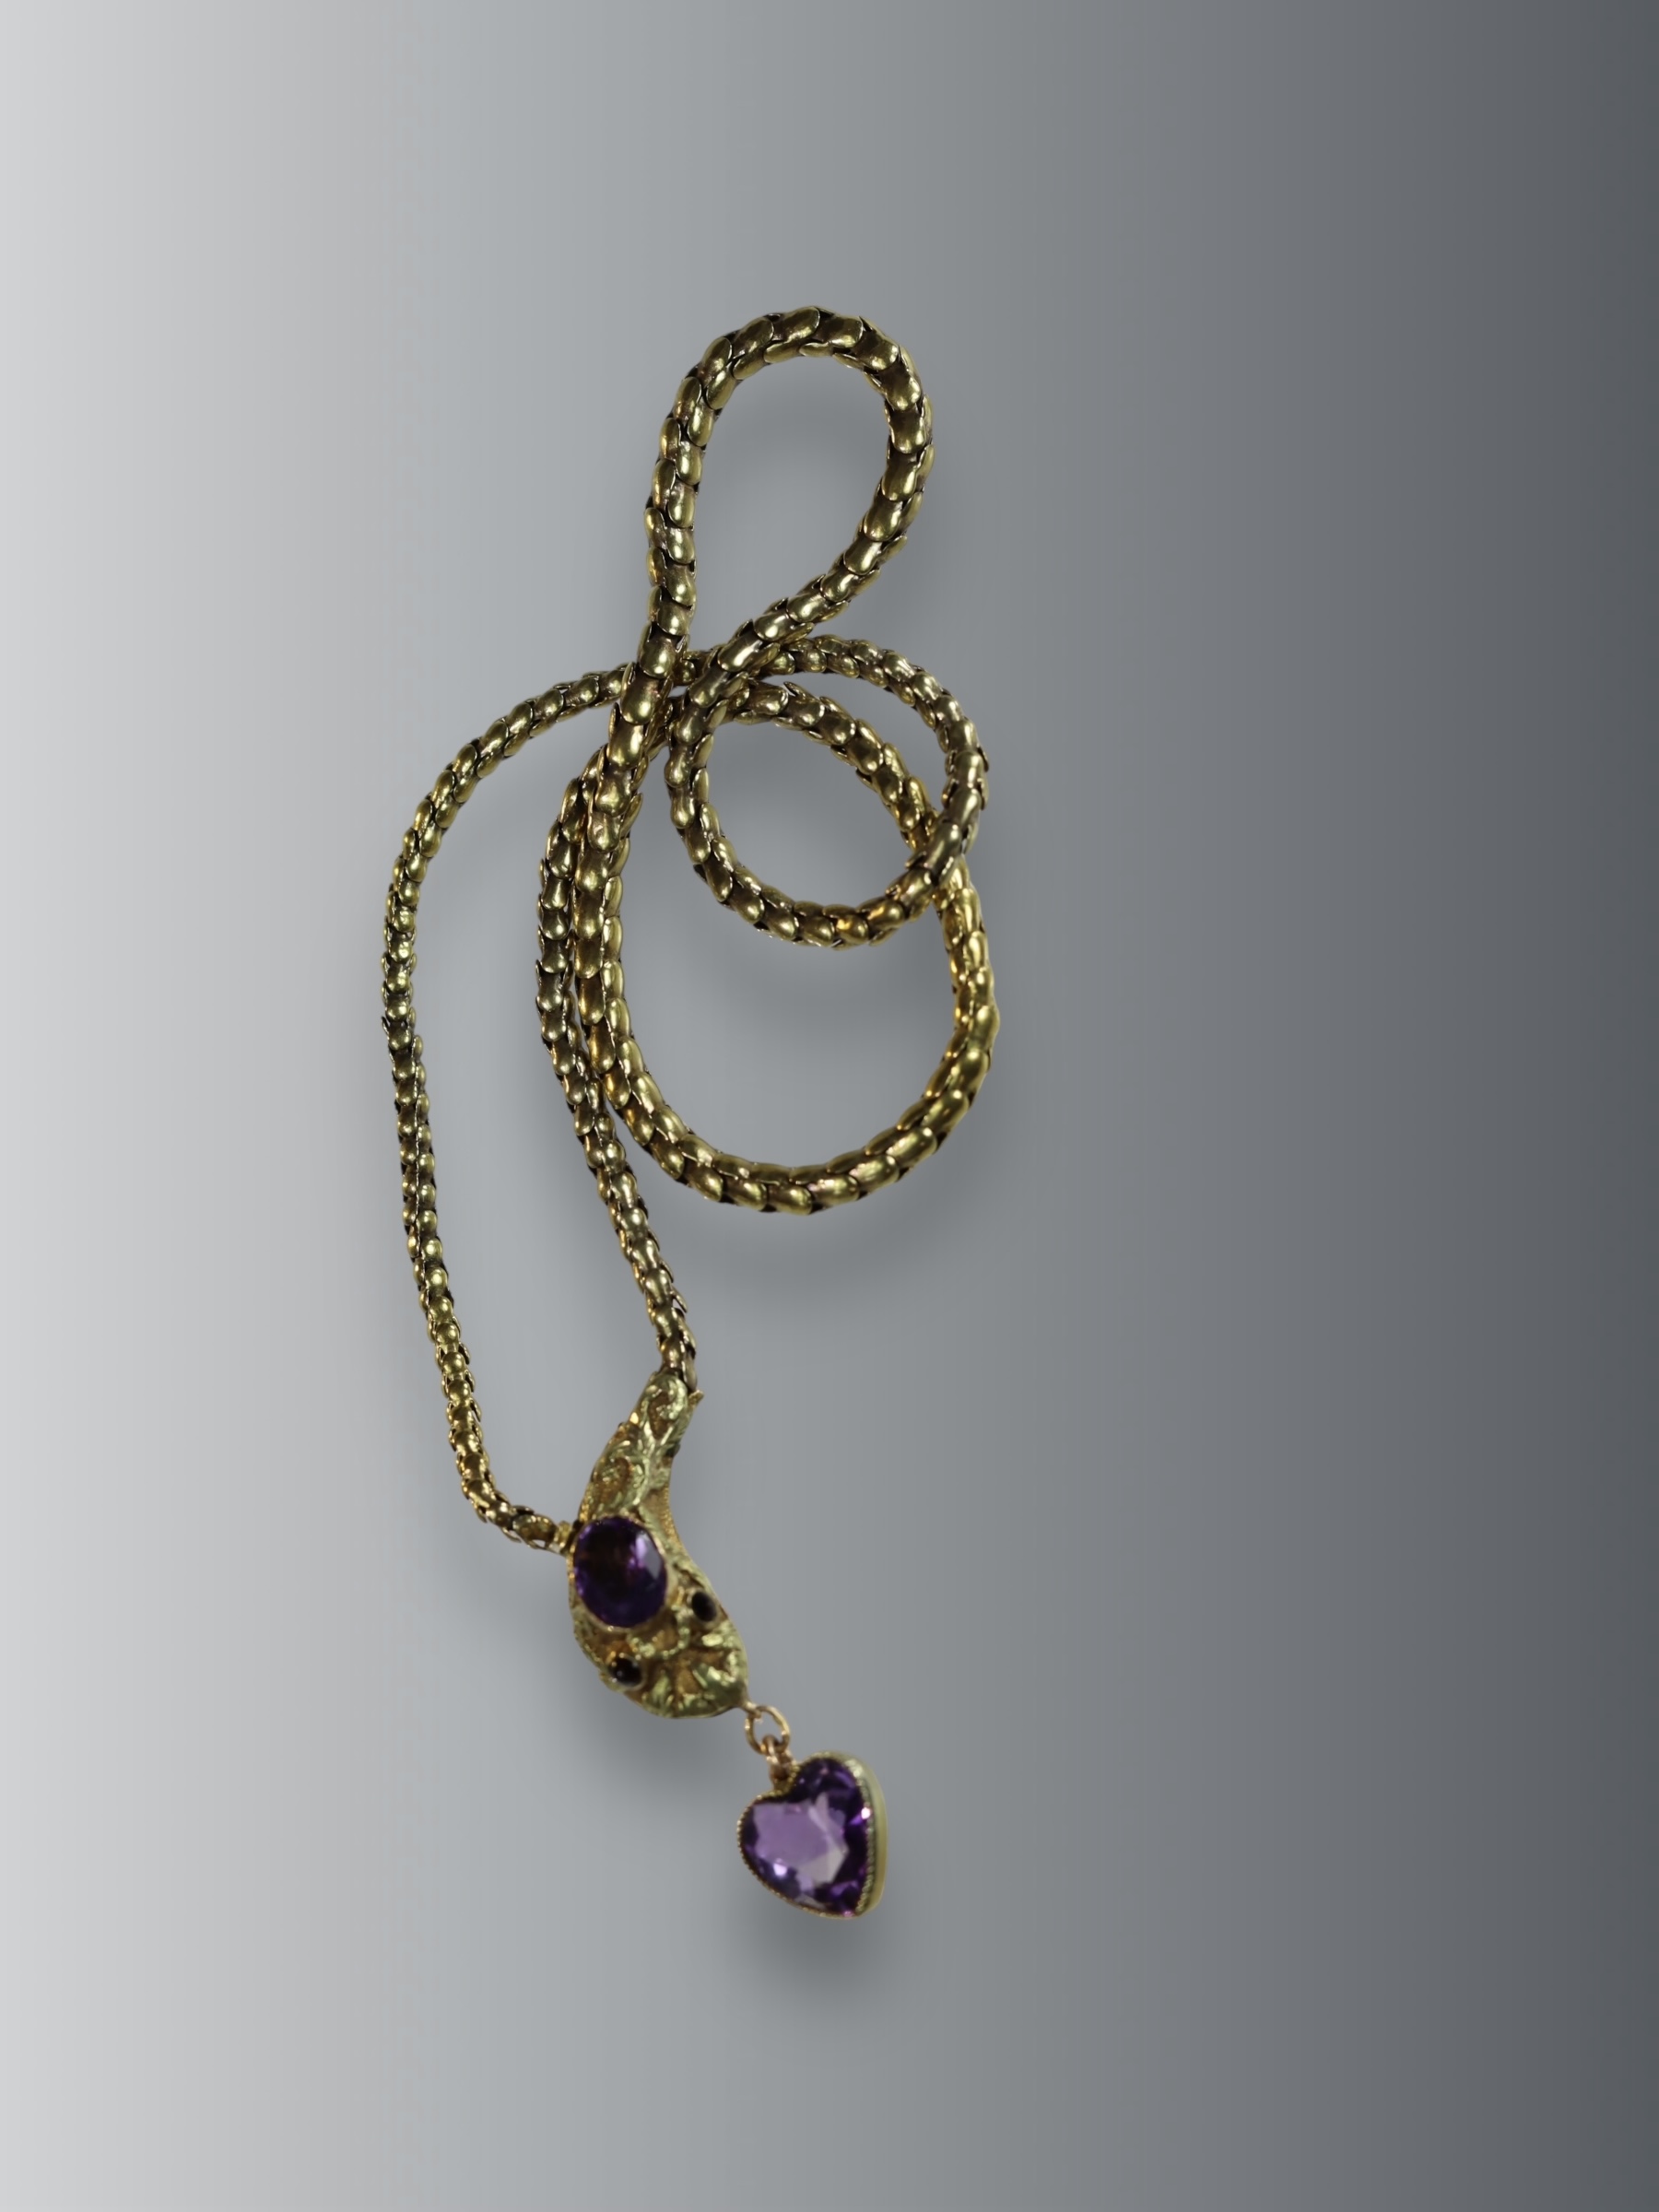 An Antique Gold and Amethyst Snake Necklace, circa1860,the head set with an oval shaped millgrain